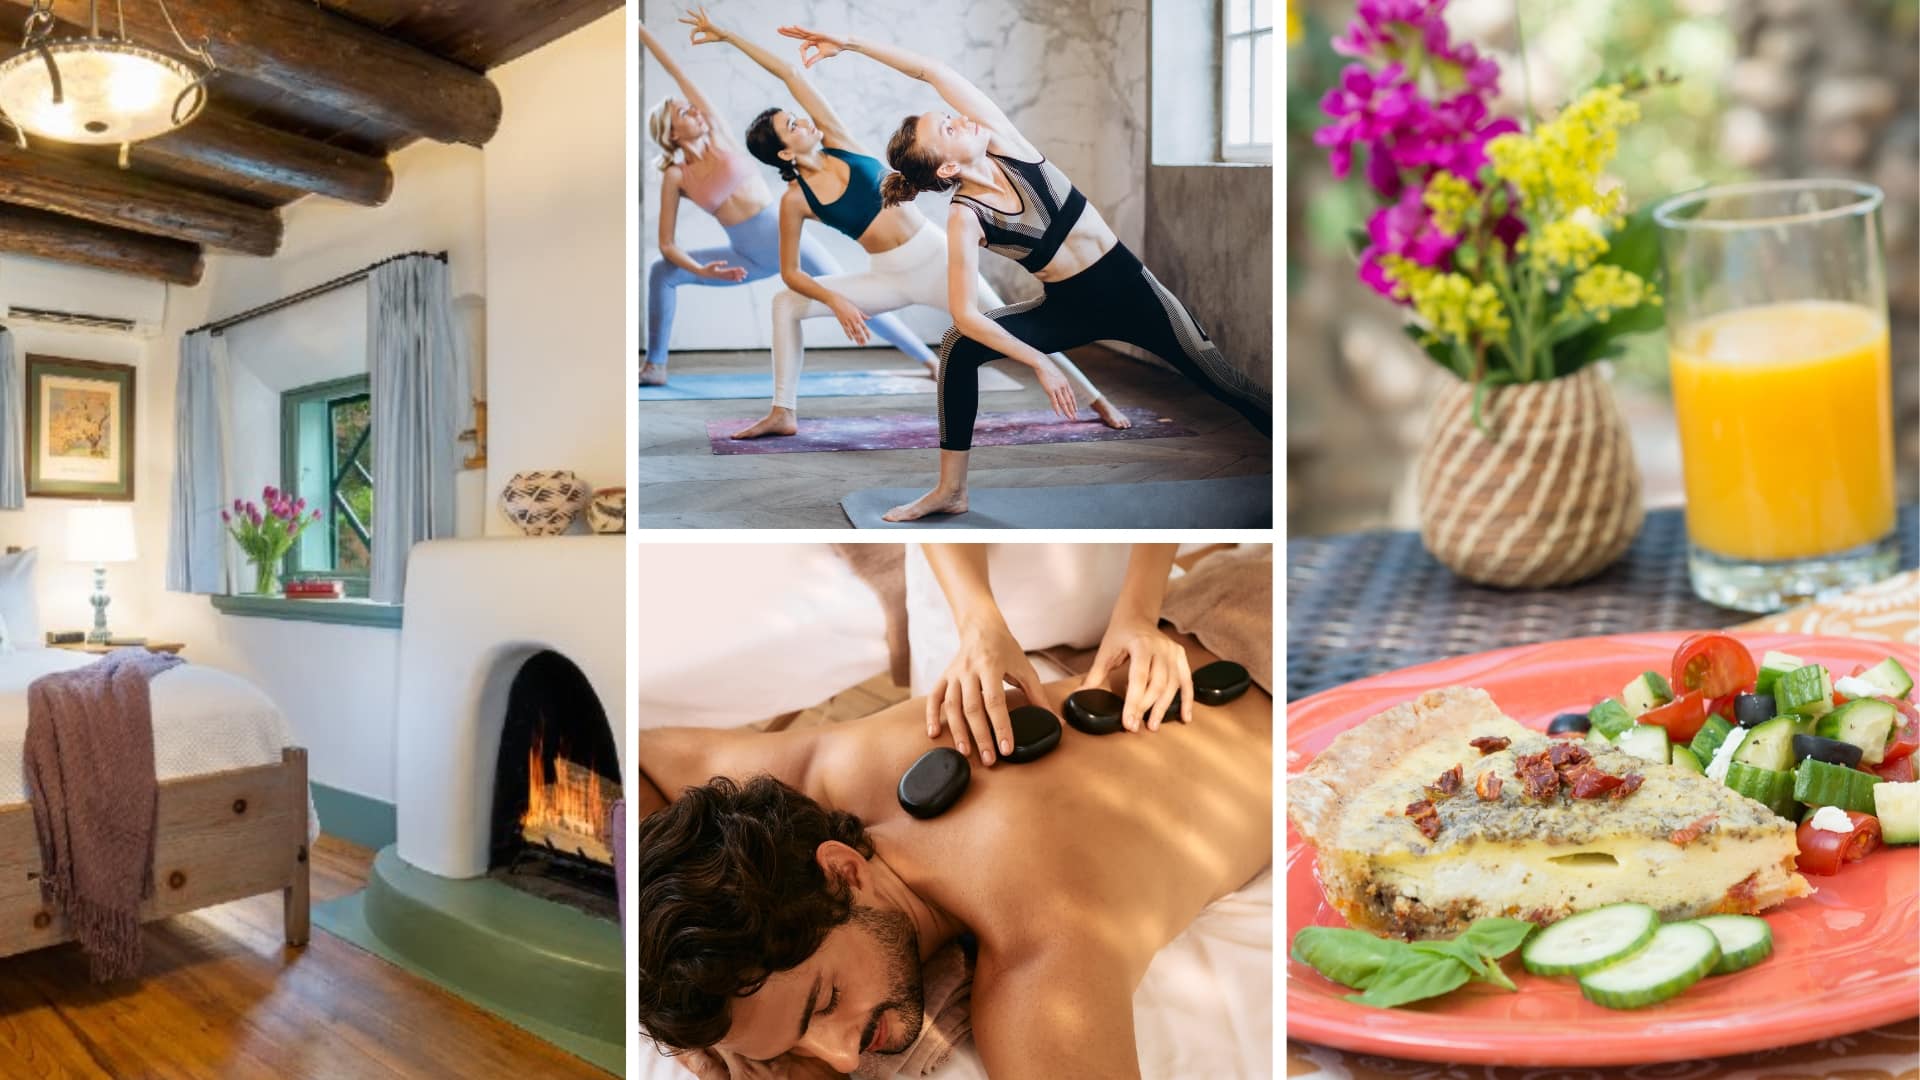 Collage of bed and fireplace of guestroom at Inn of the Turquoise Bear, three women practicing yoga, man getting a massage with hot stones, breakfast plate and glass of orange juice